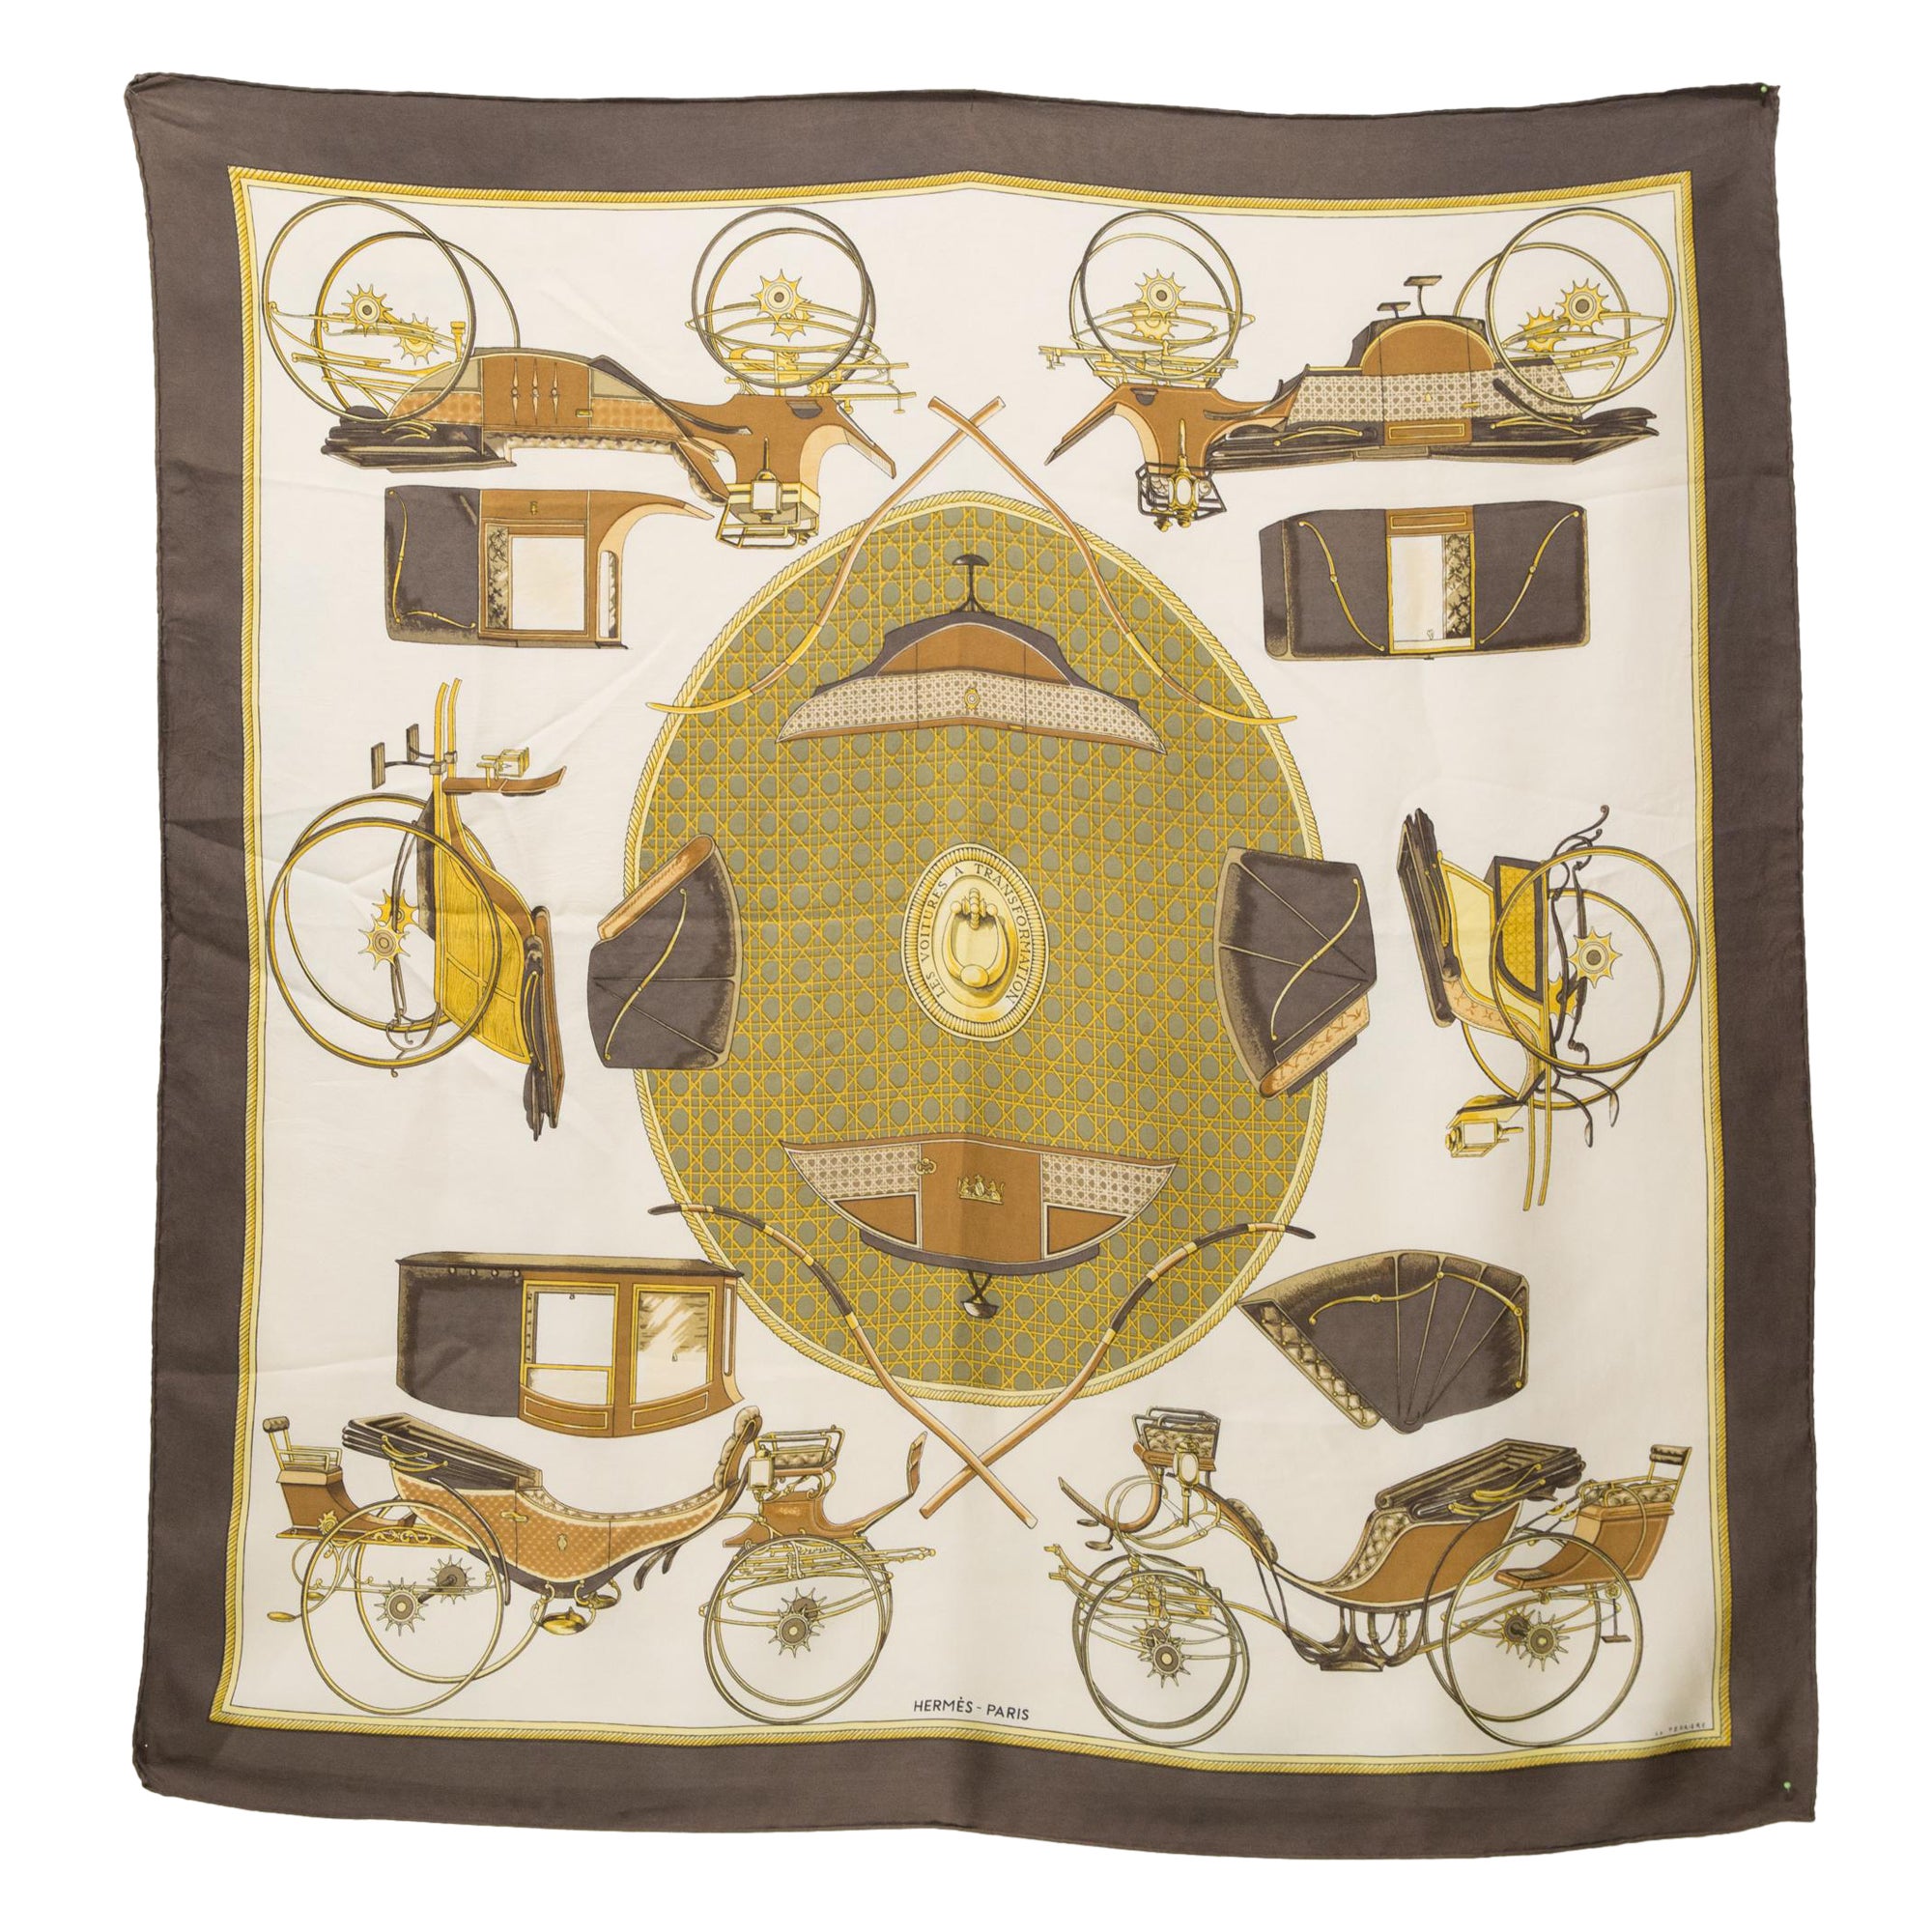 A lighthearted take on autumn in Hermès' latest scarf collection